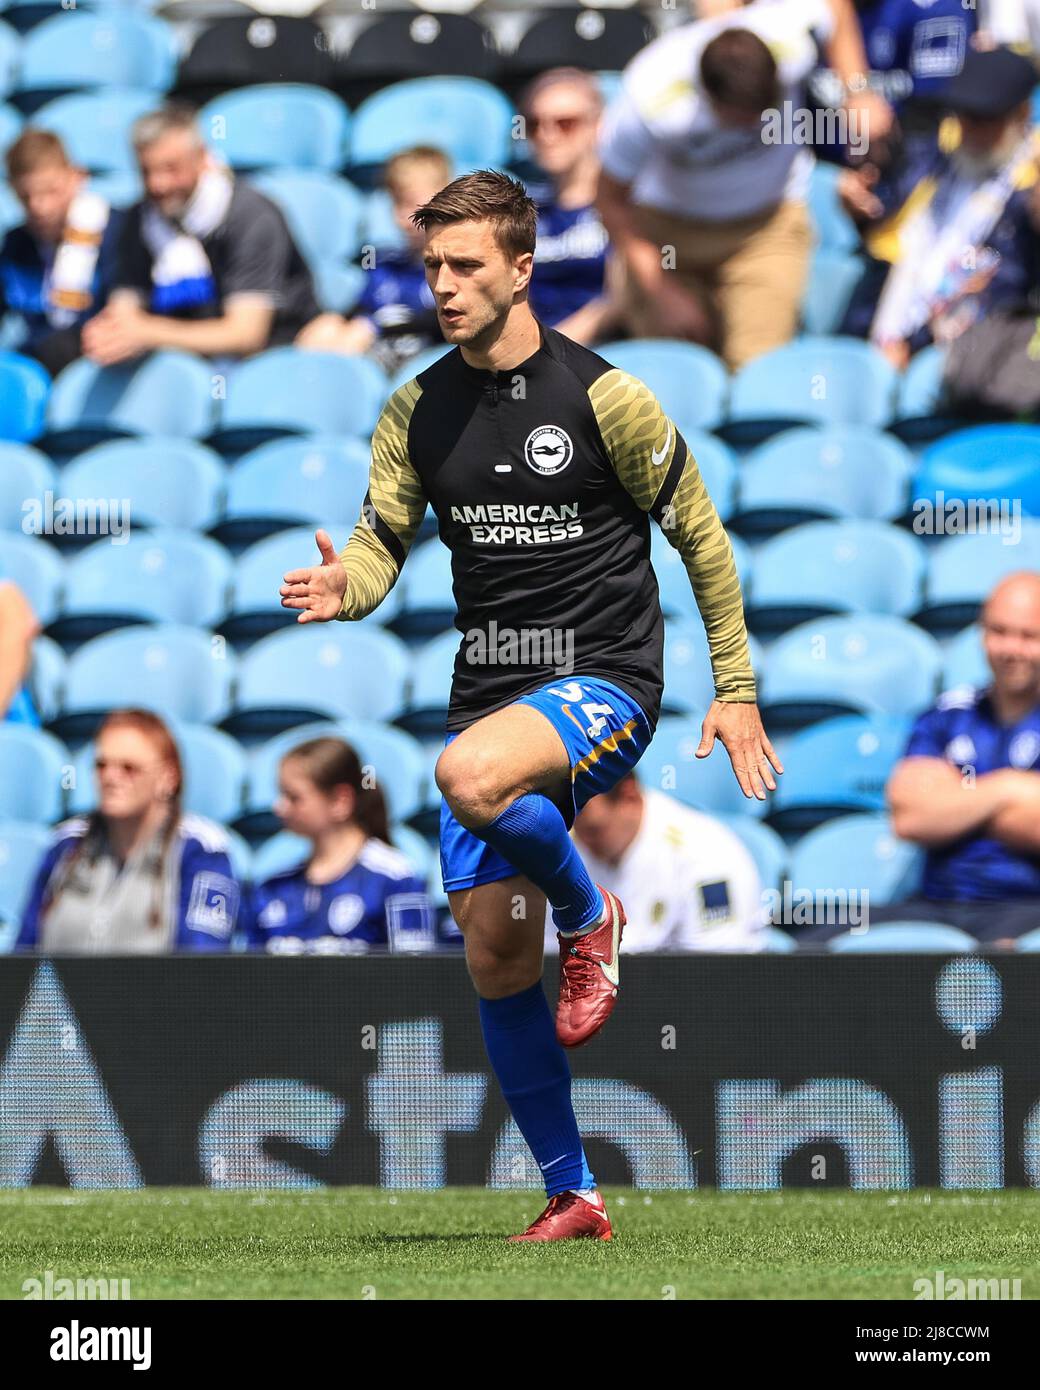 Joël Veltman #34 of Brighton & Hove Albion during the pre-game warmup  in Leeds, United Kingdom on 5/15/2022. (Photo by Mark Cosgrove/News Images/Sipa USA) Stock Photo